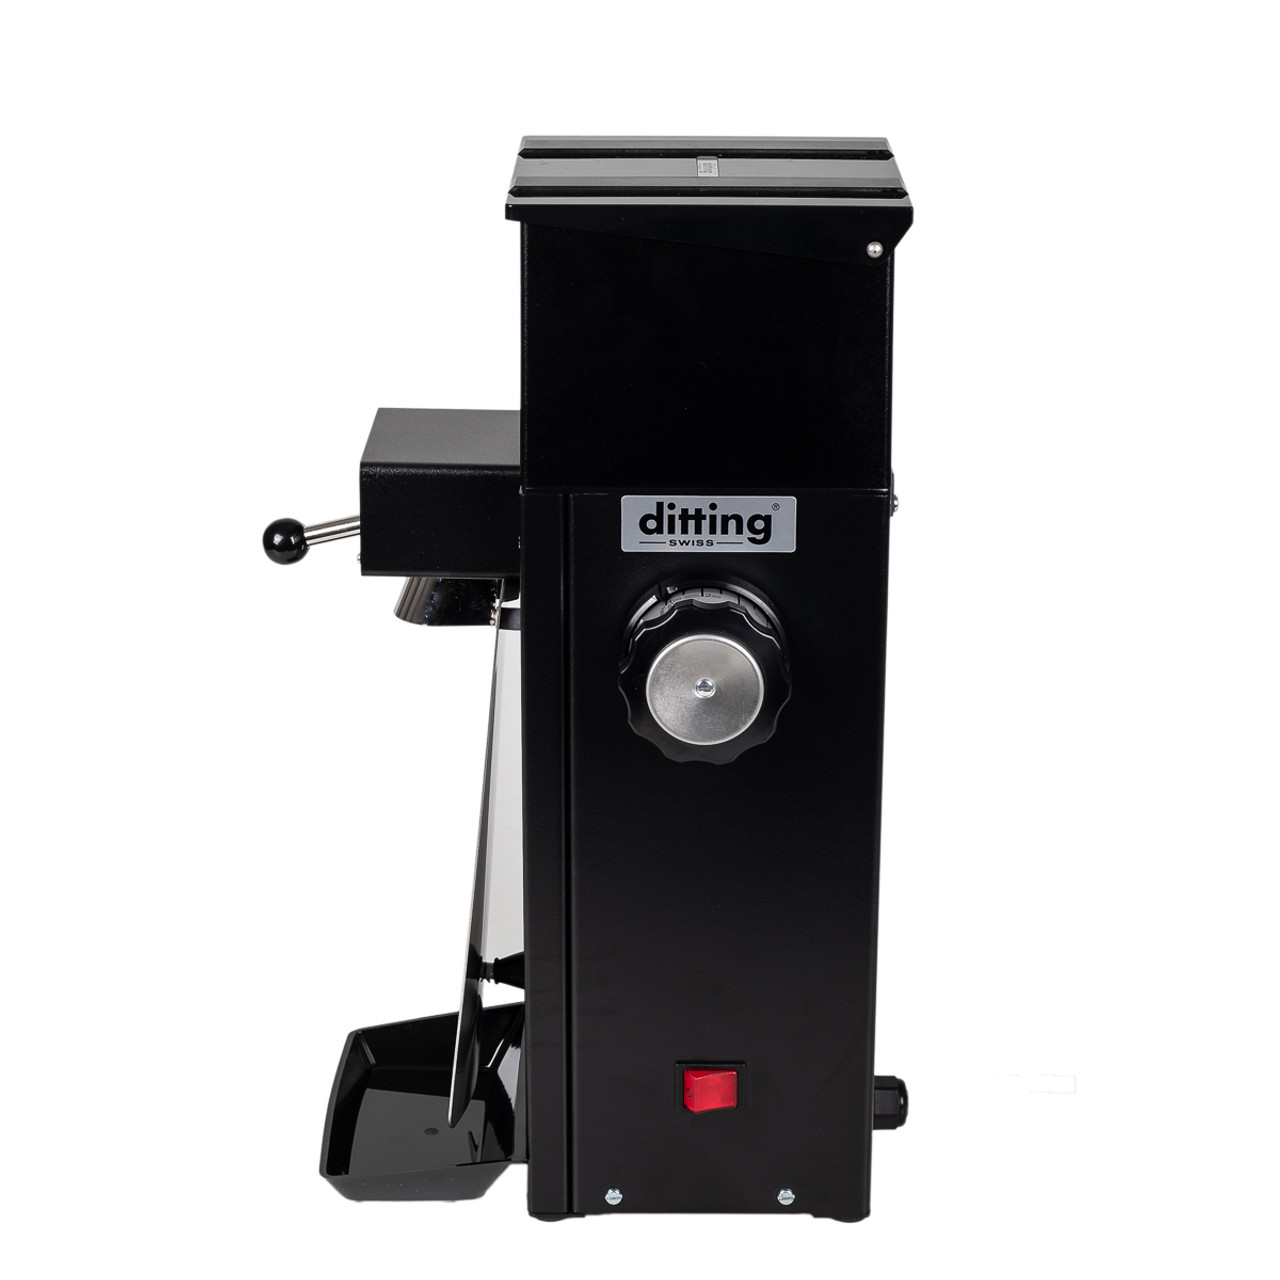 USED - EXCELLENT | Ditting KR804 Retail Coffee Grinder